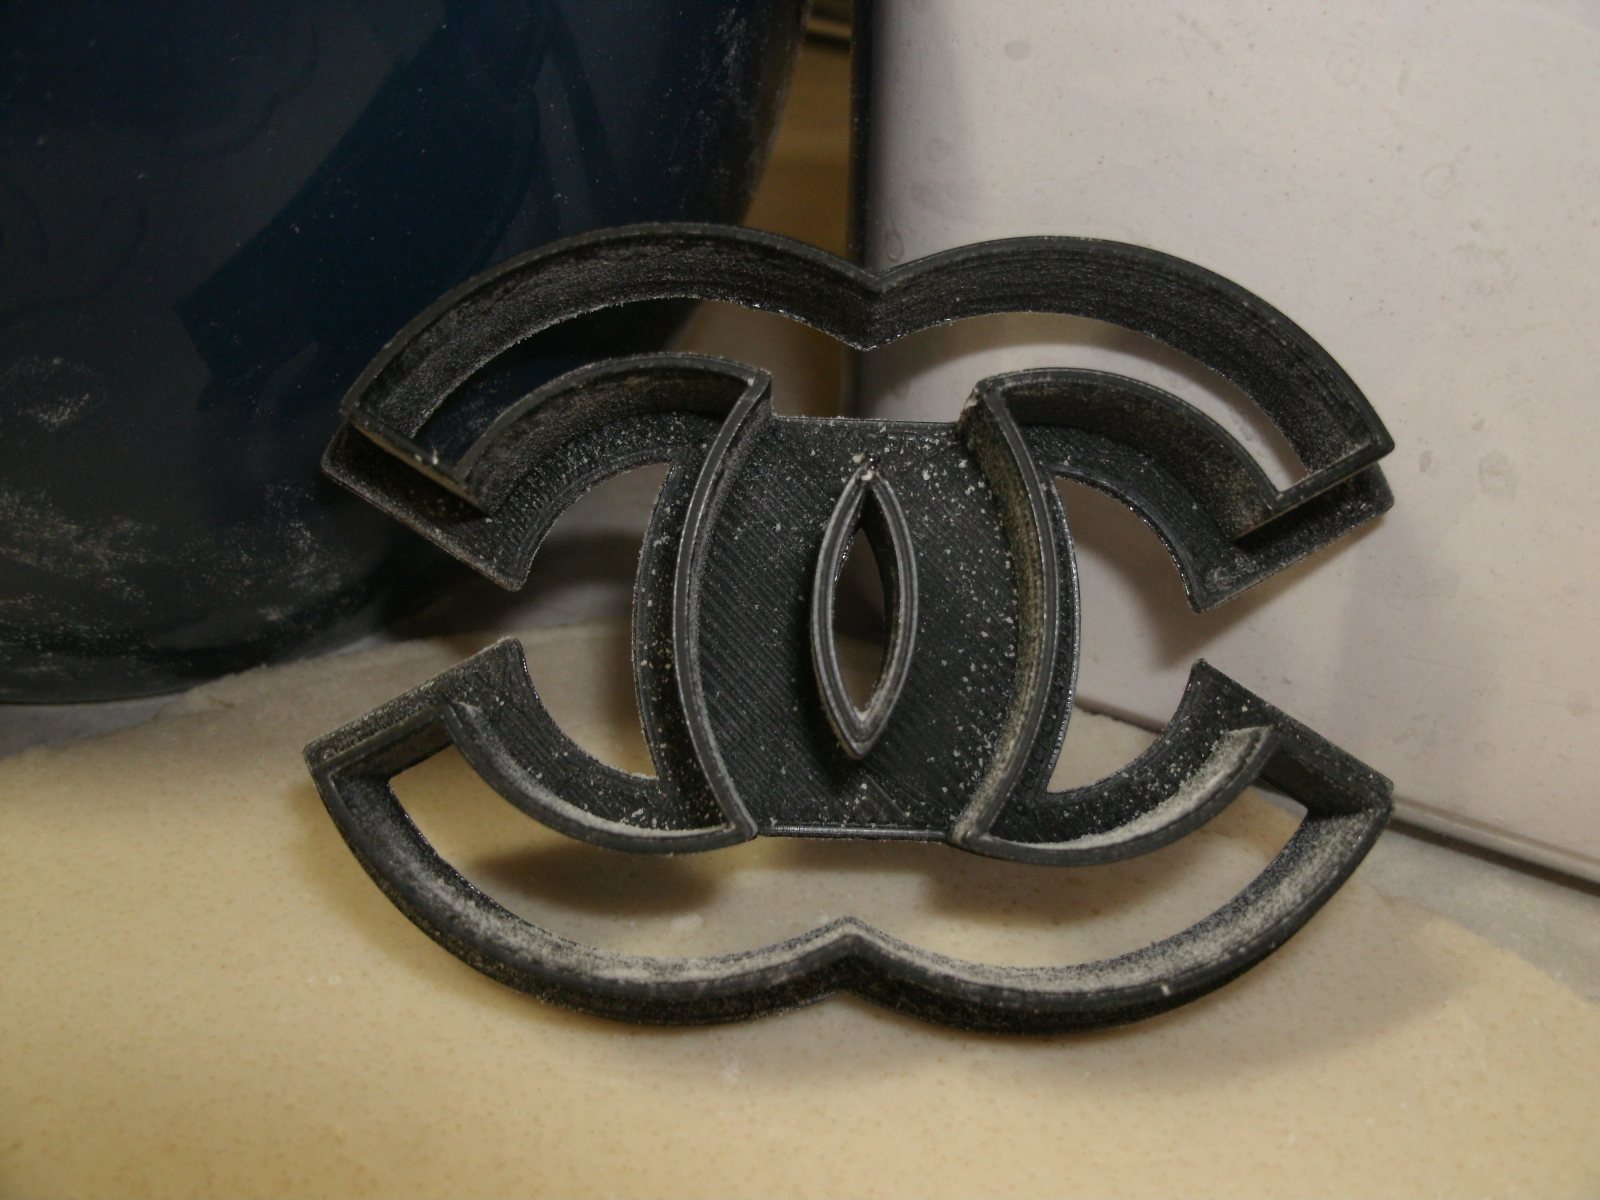 Chanel Cookie Cutter